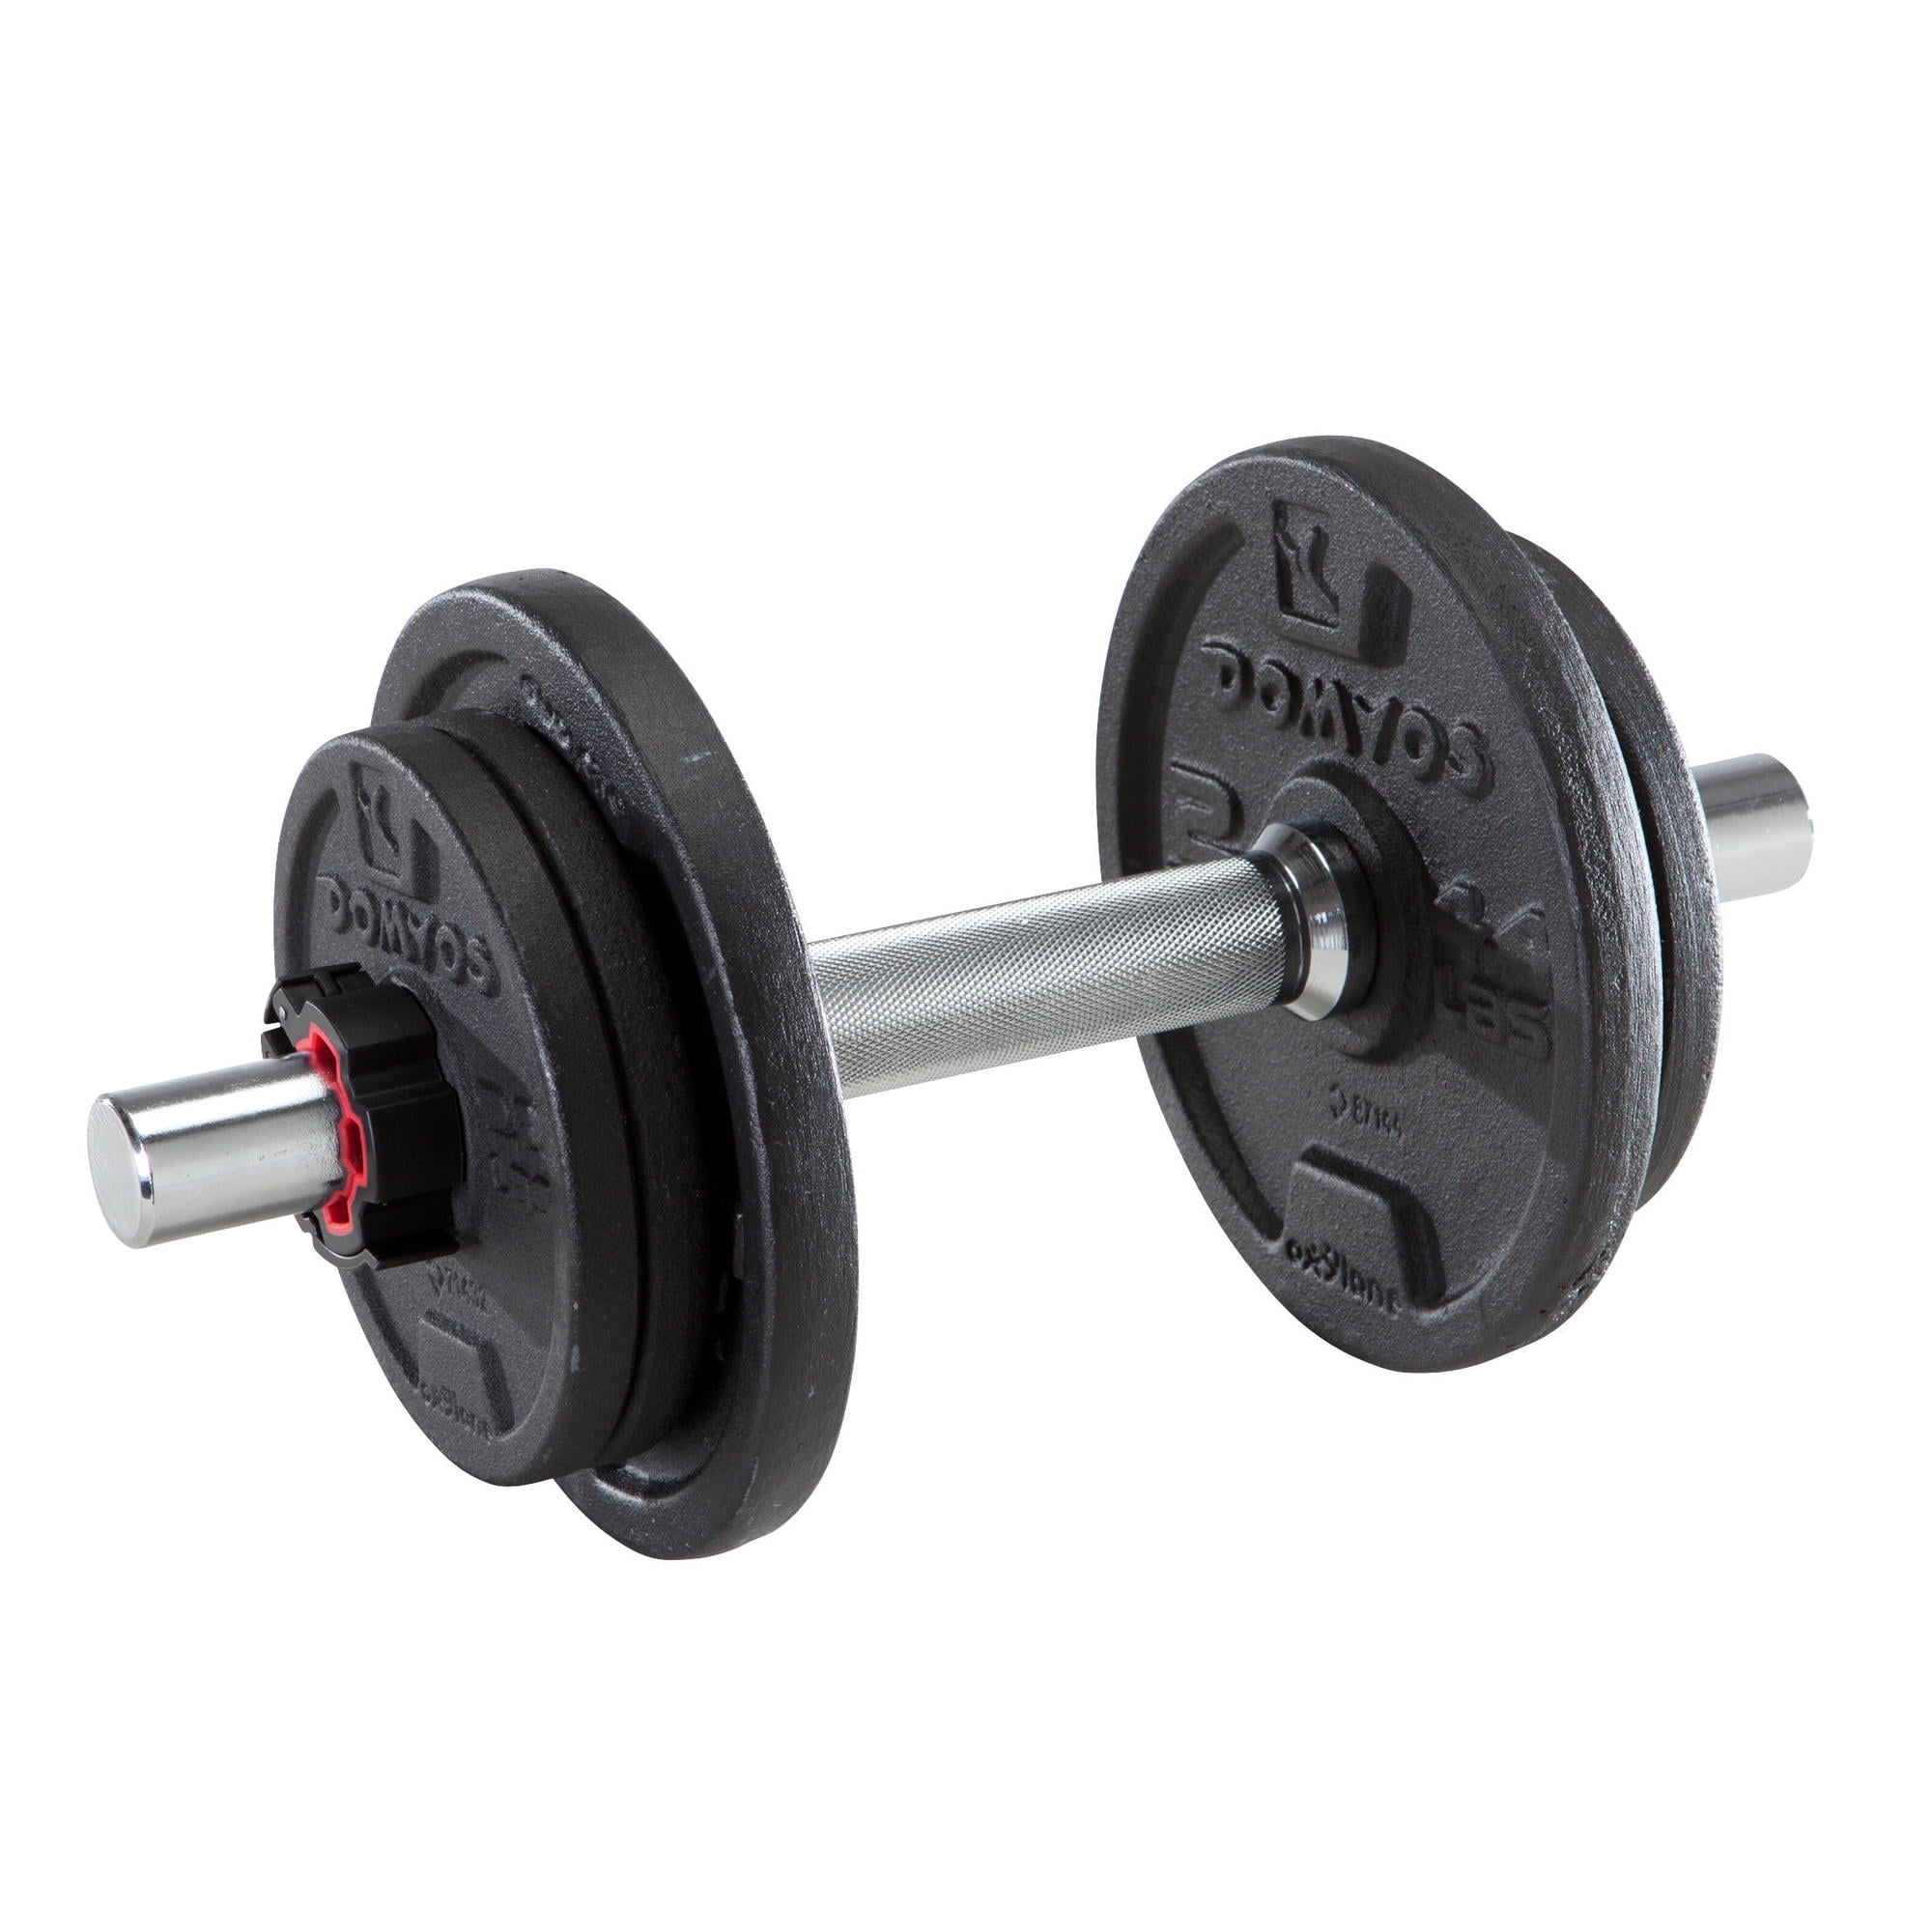 NEW CAP 40 Lb Total Adjustable Cast Iron Dumbbell Weight Set free shipping 